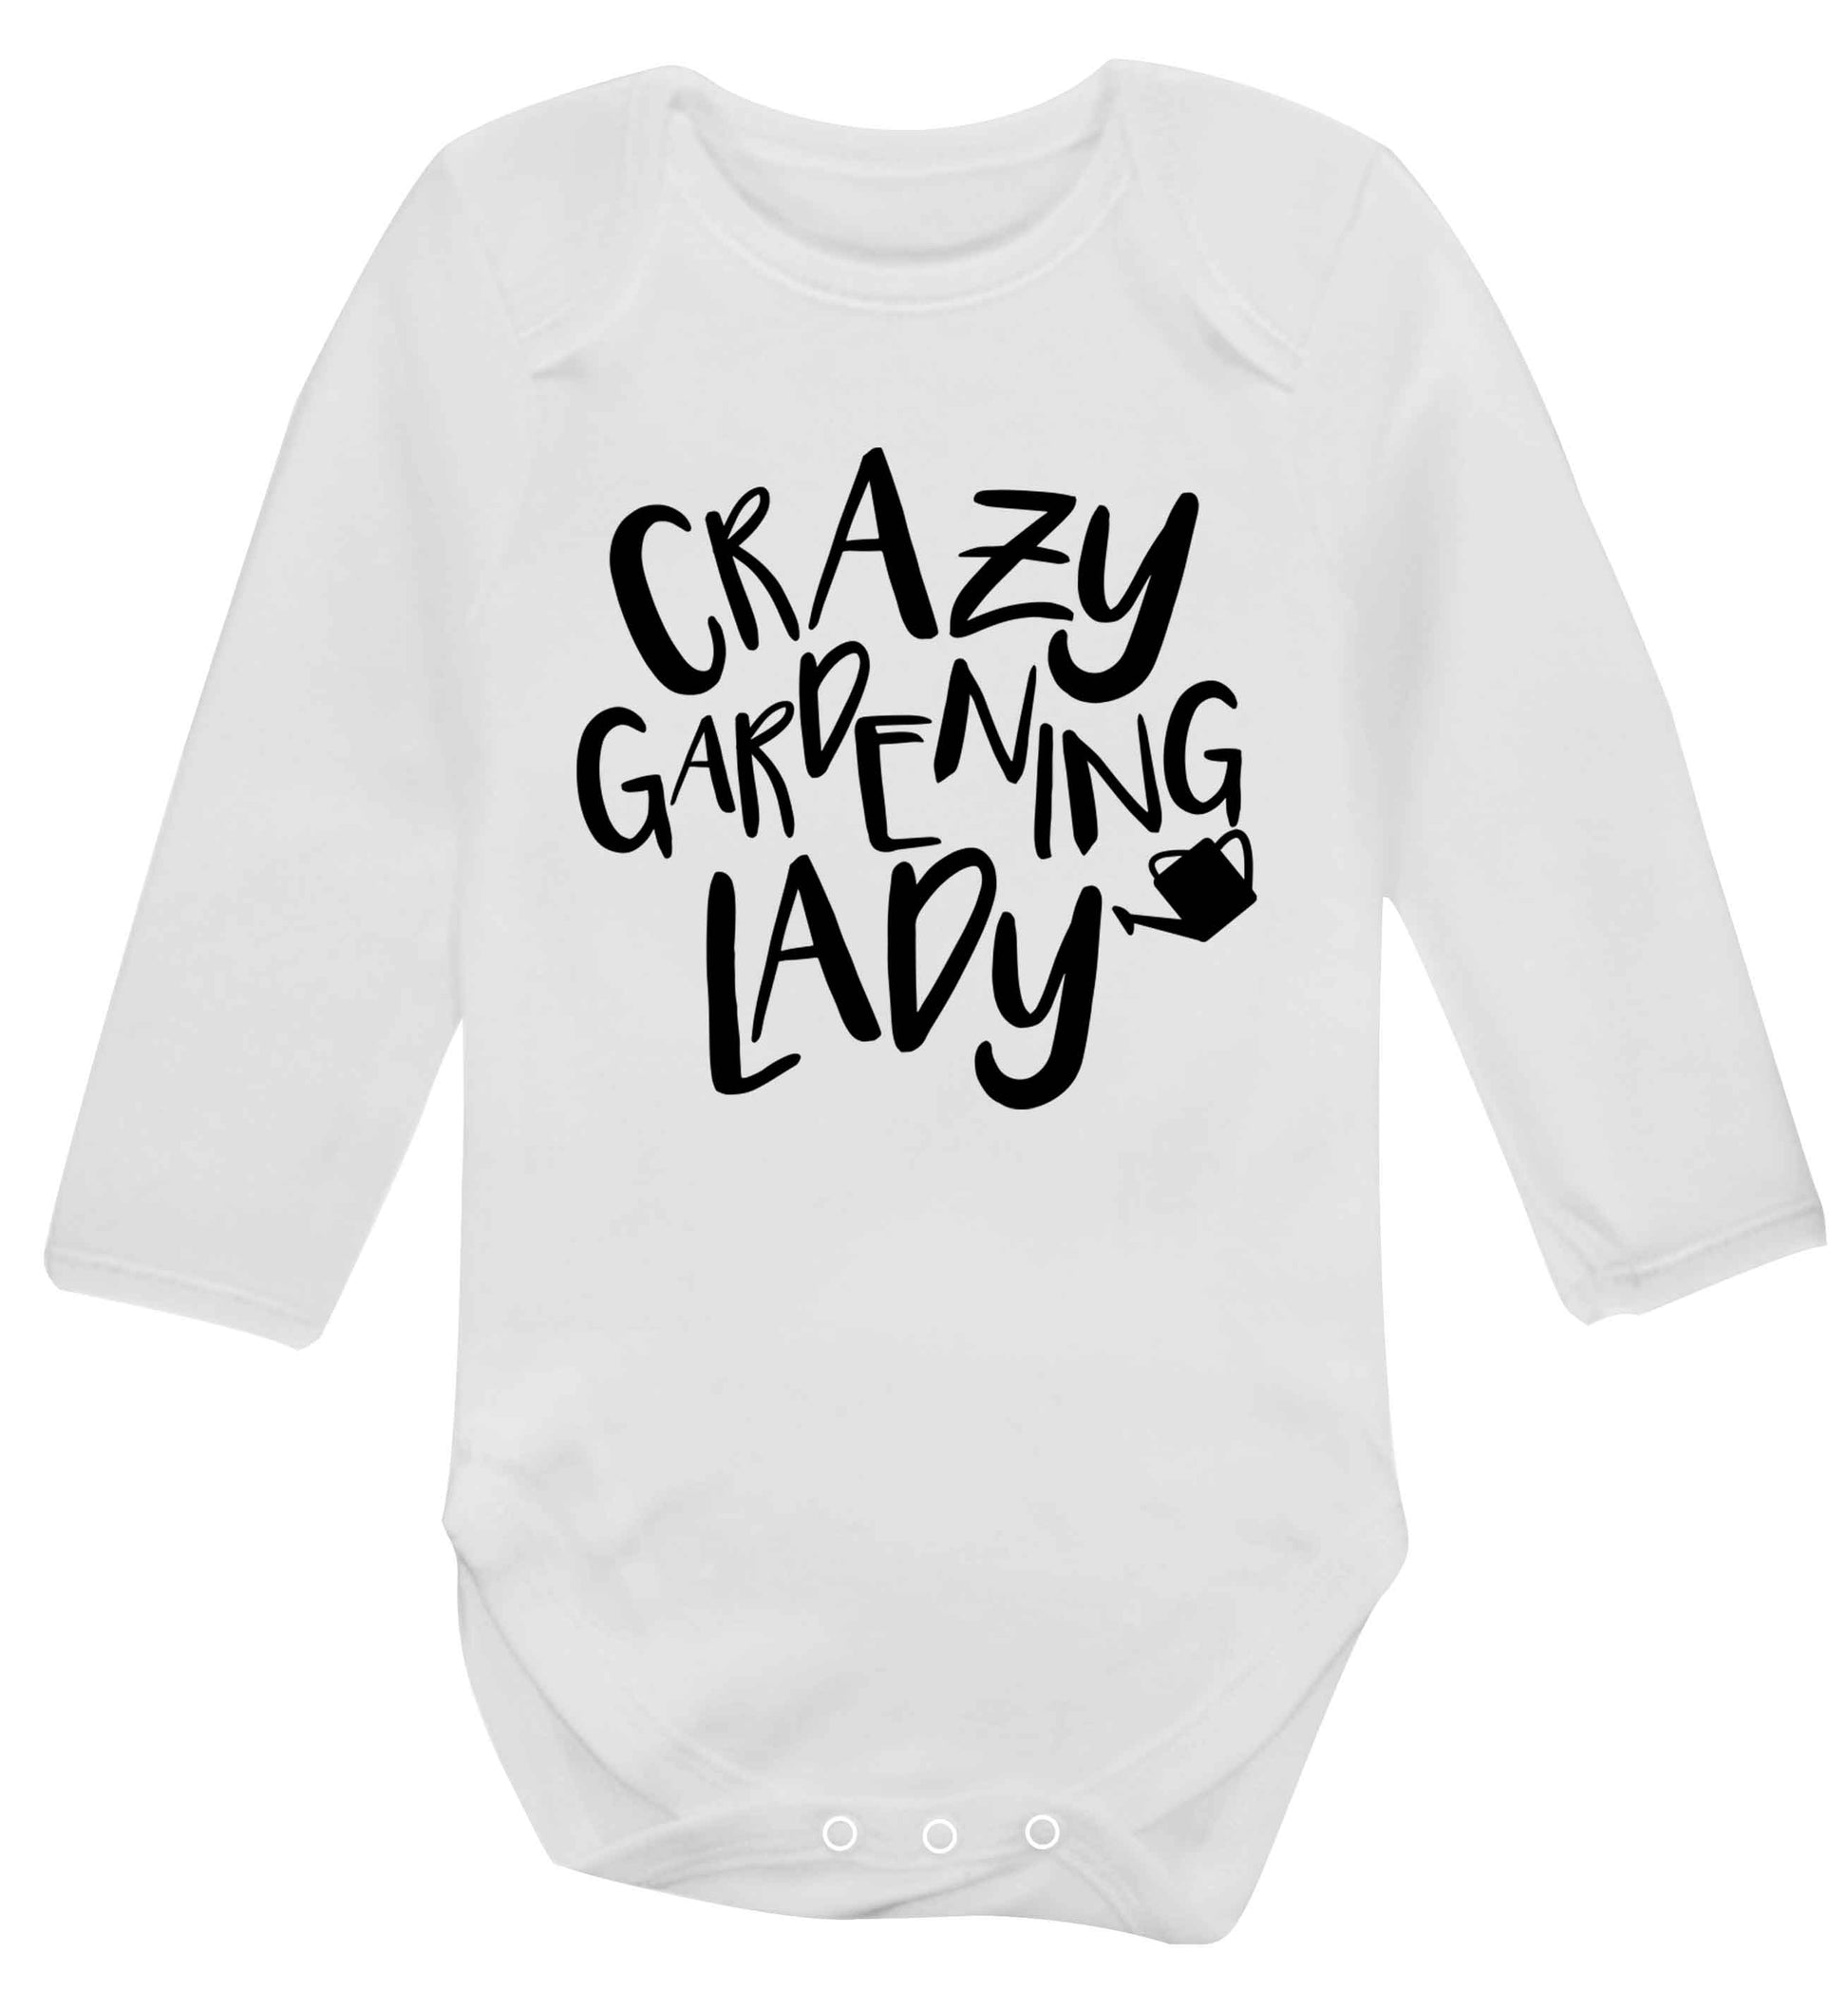 Crazy gardening lady Baby Vest long sleeved white 6-12 months